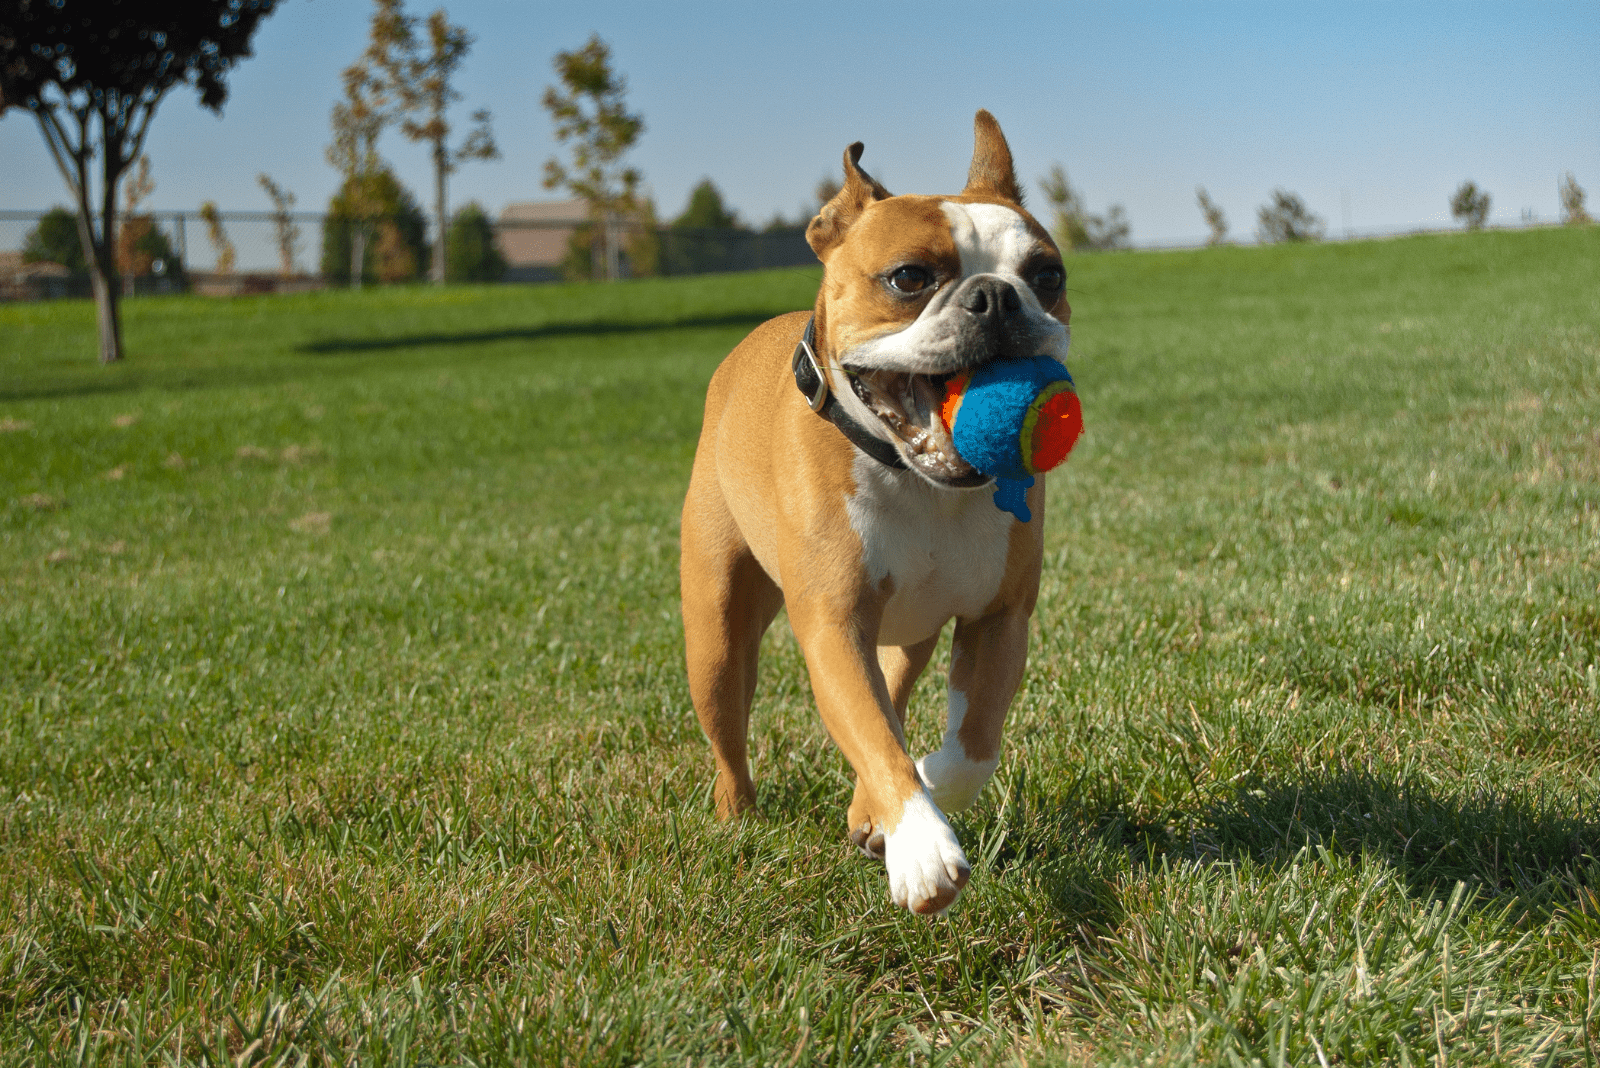 Brown Boston Terrier running with a ball in his mouth